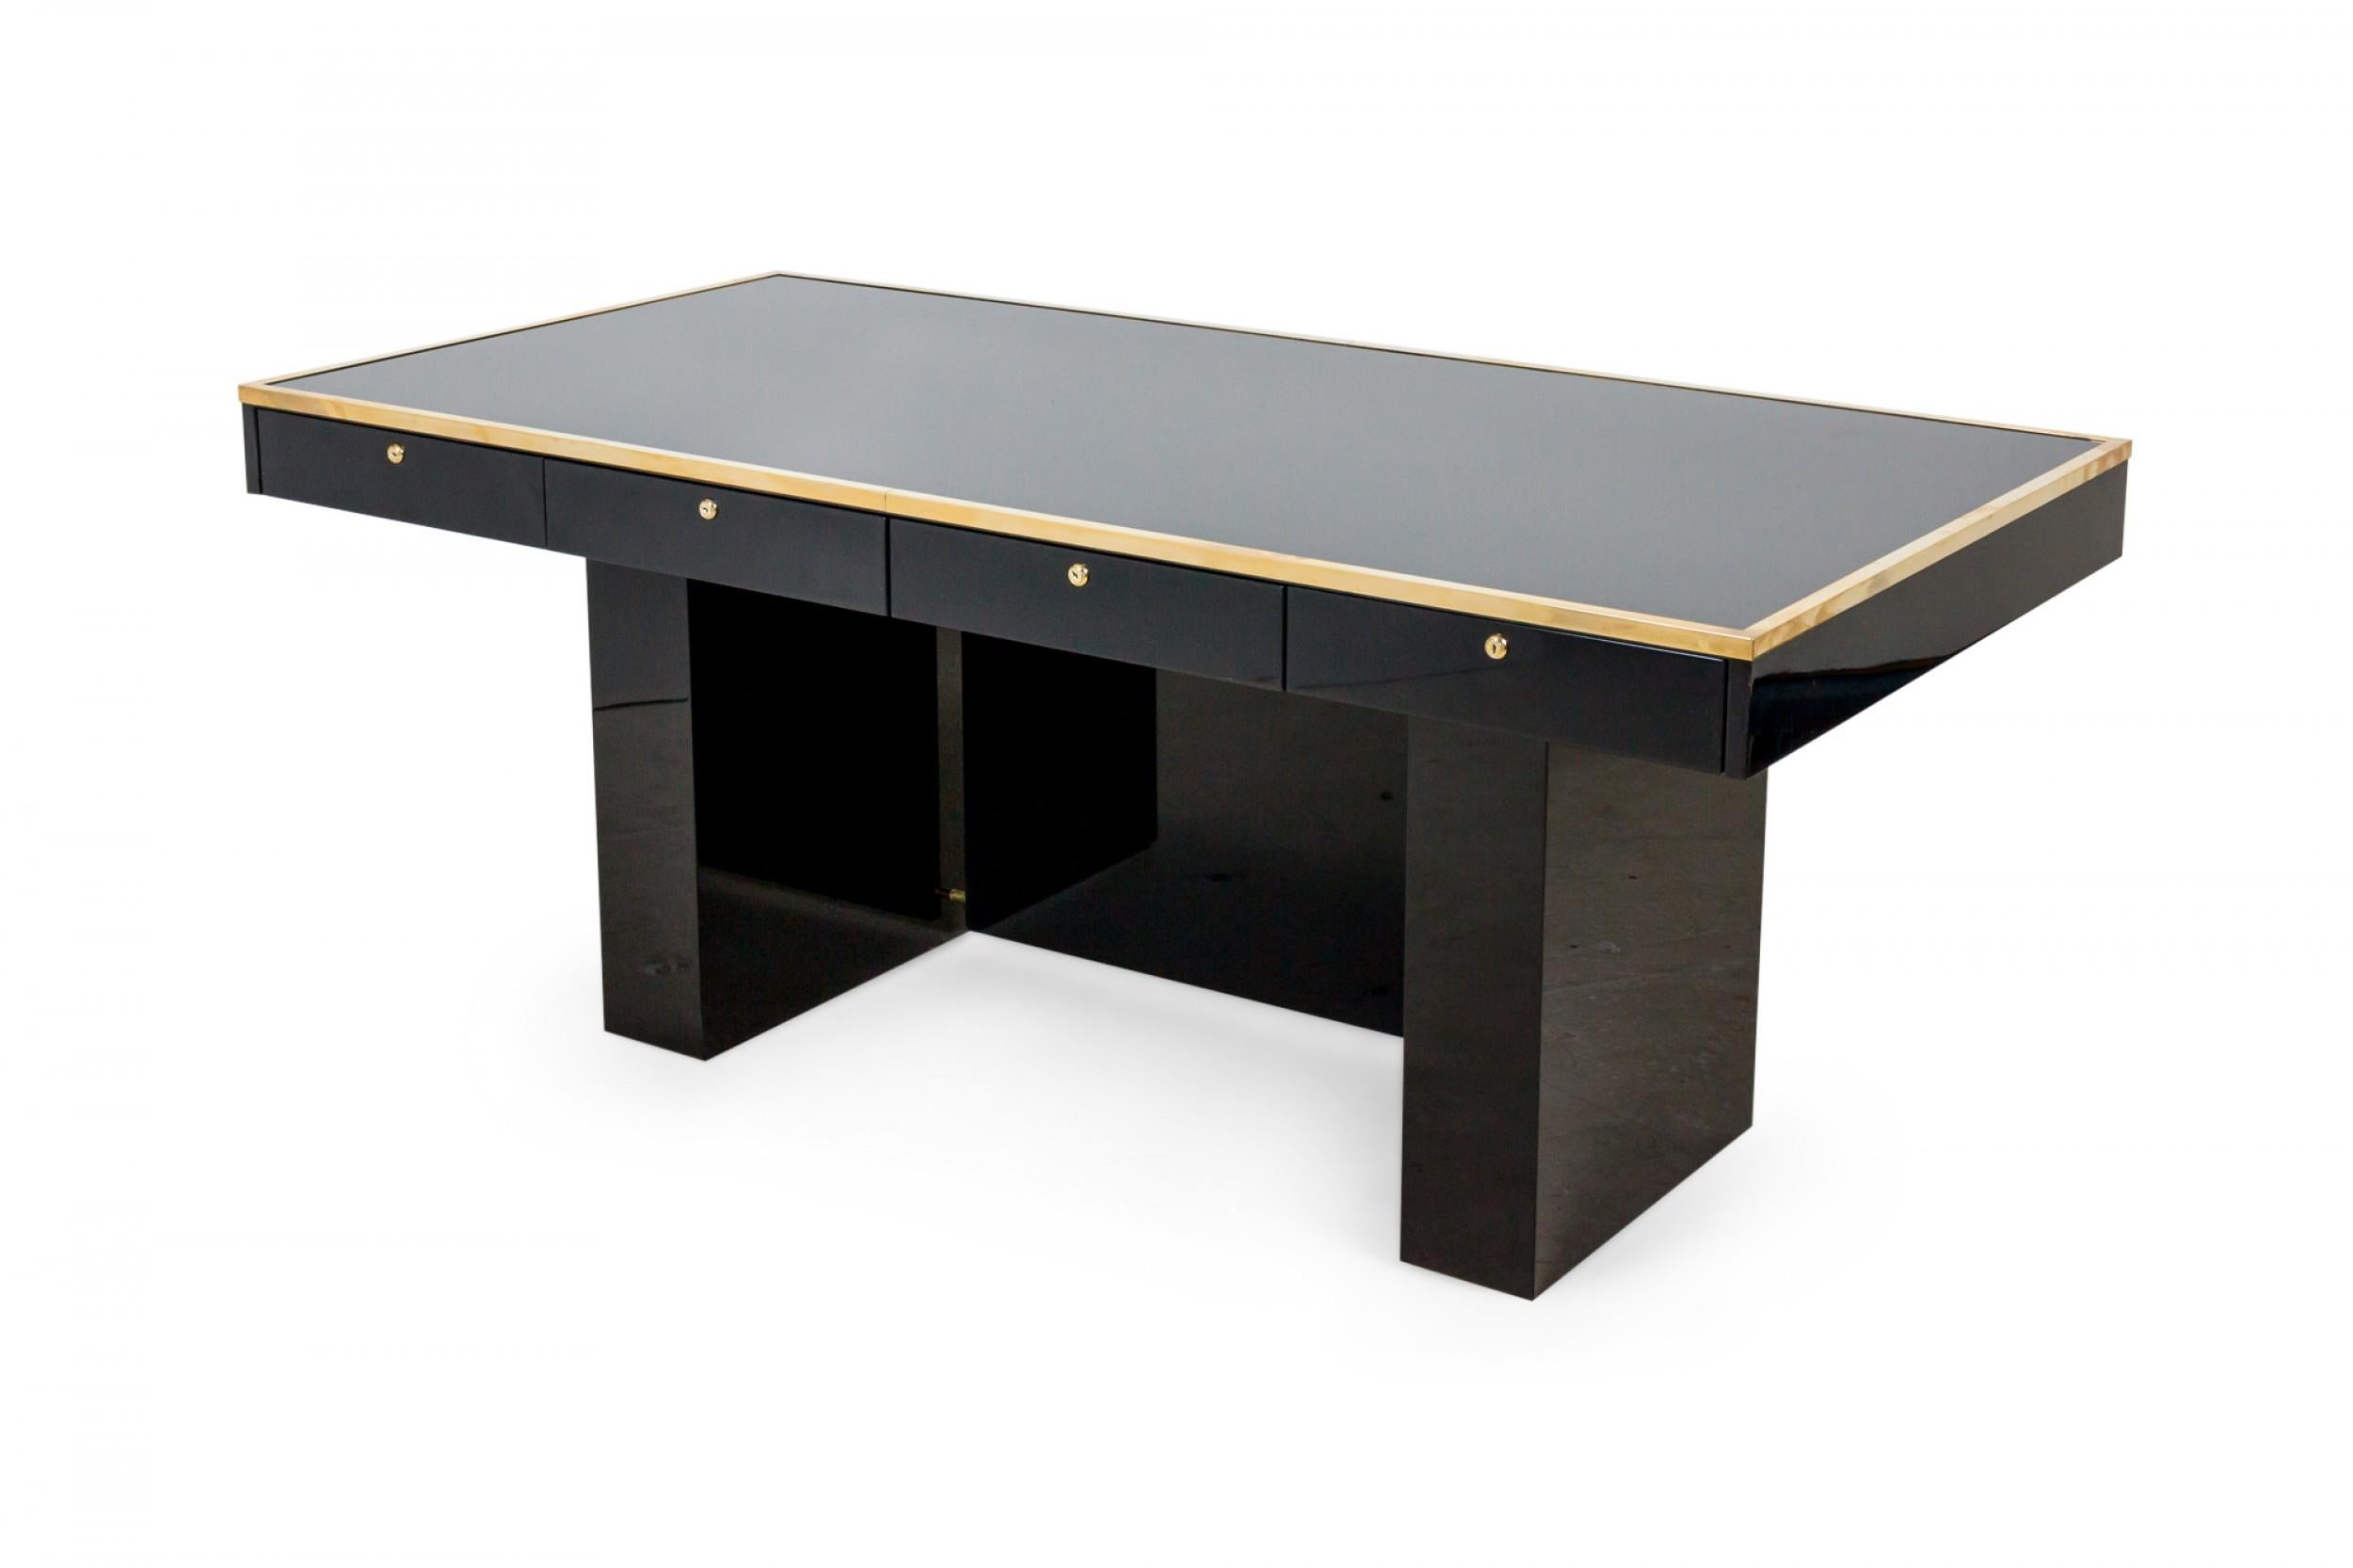 Italian mid-century style black lacquered desk with brass trimmed edge and 4 drawers supported on 2 rectangular pedestals centering a vanity panel. Done in the style of Aldo Tura (can be customized in size and color).